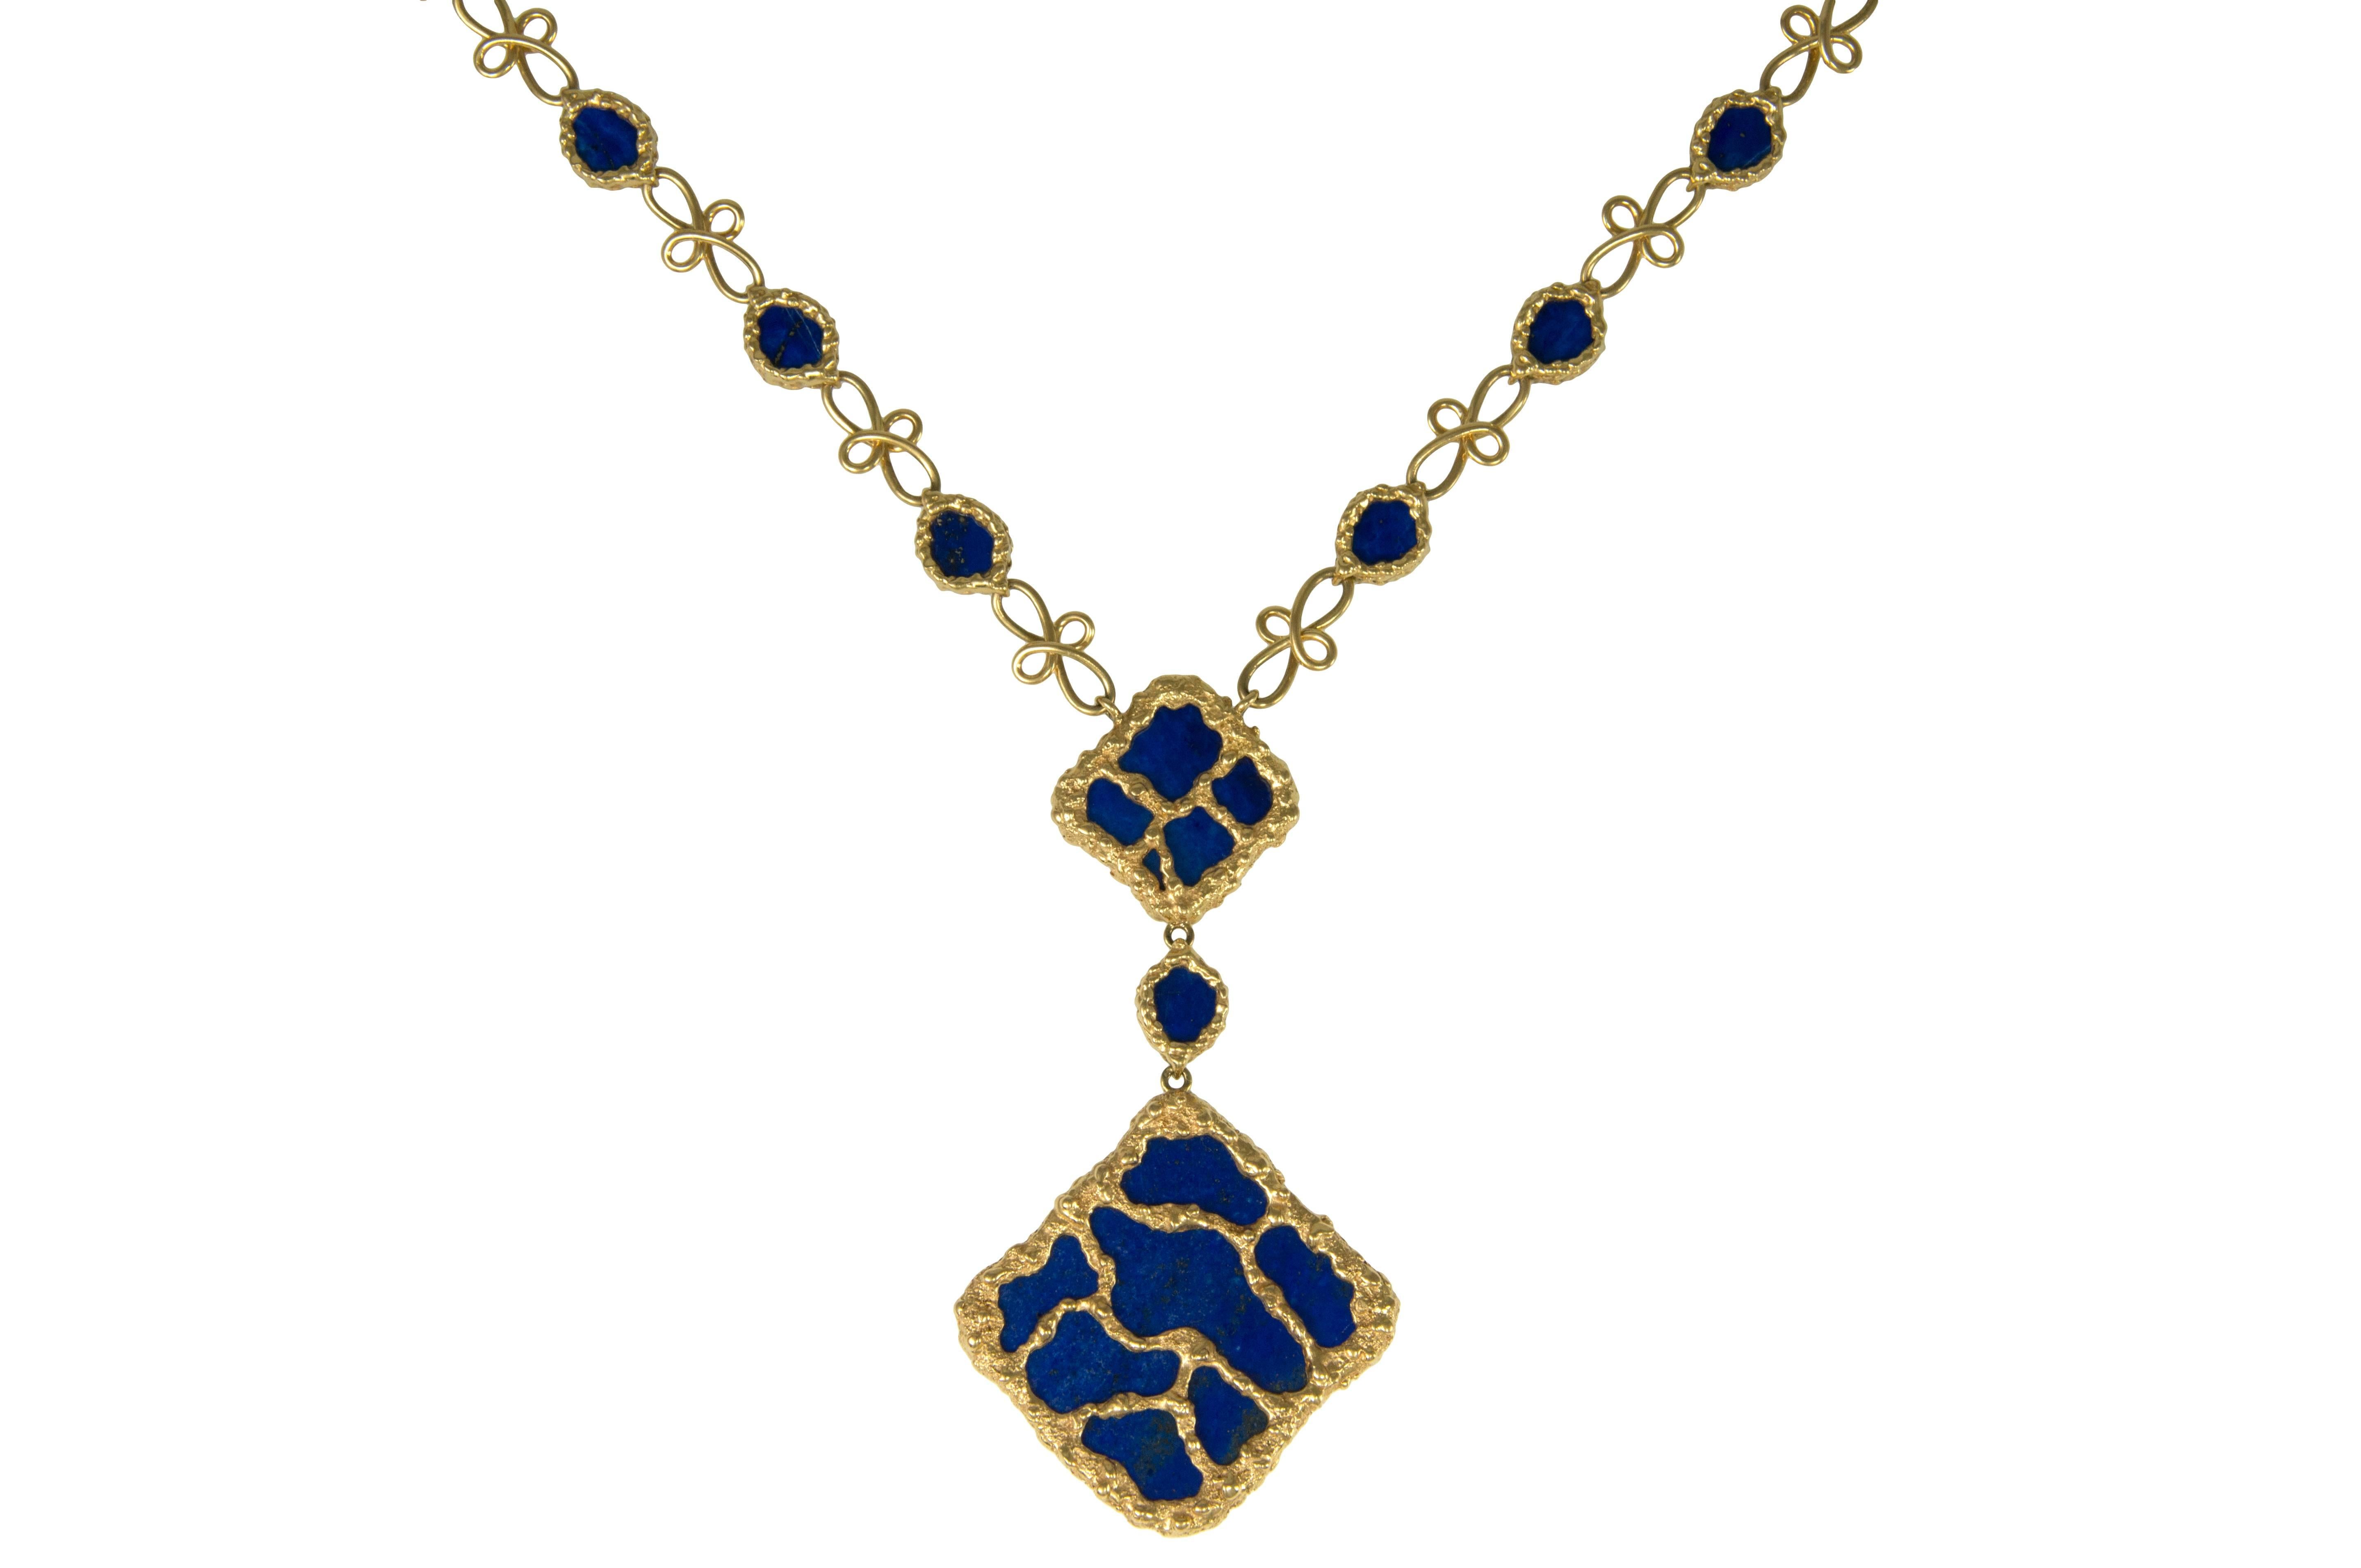 A French-made organic design chain and pendant necklace from the 1970s. The necklace is made of 18 karat textured gold encased lapis buttons, with floral links chain and a lapis lazuli pendant with textured gold inserts., c. 1970. We believe this